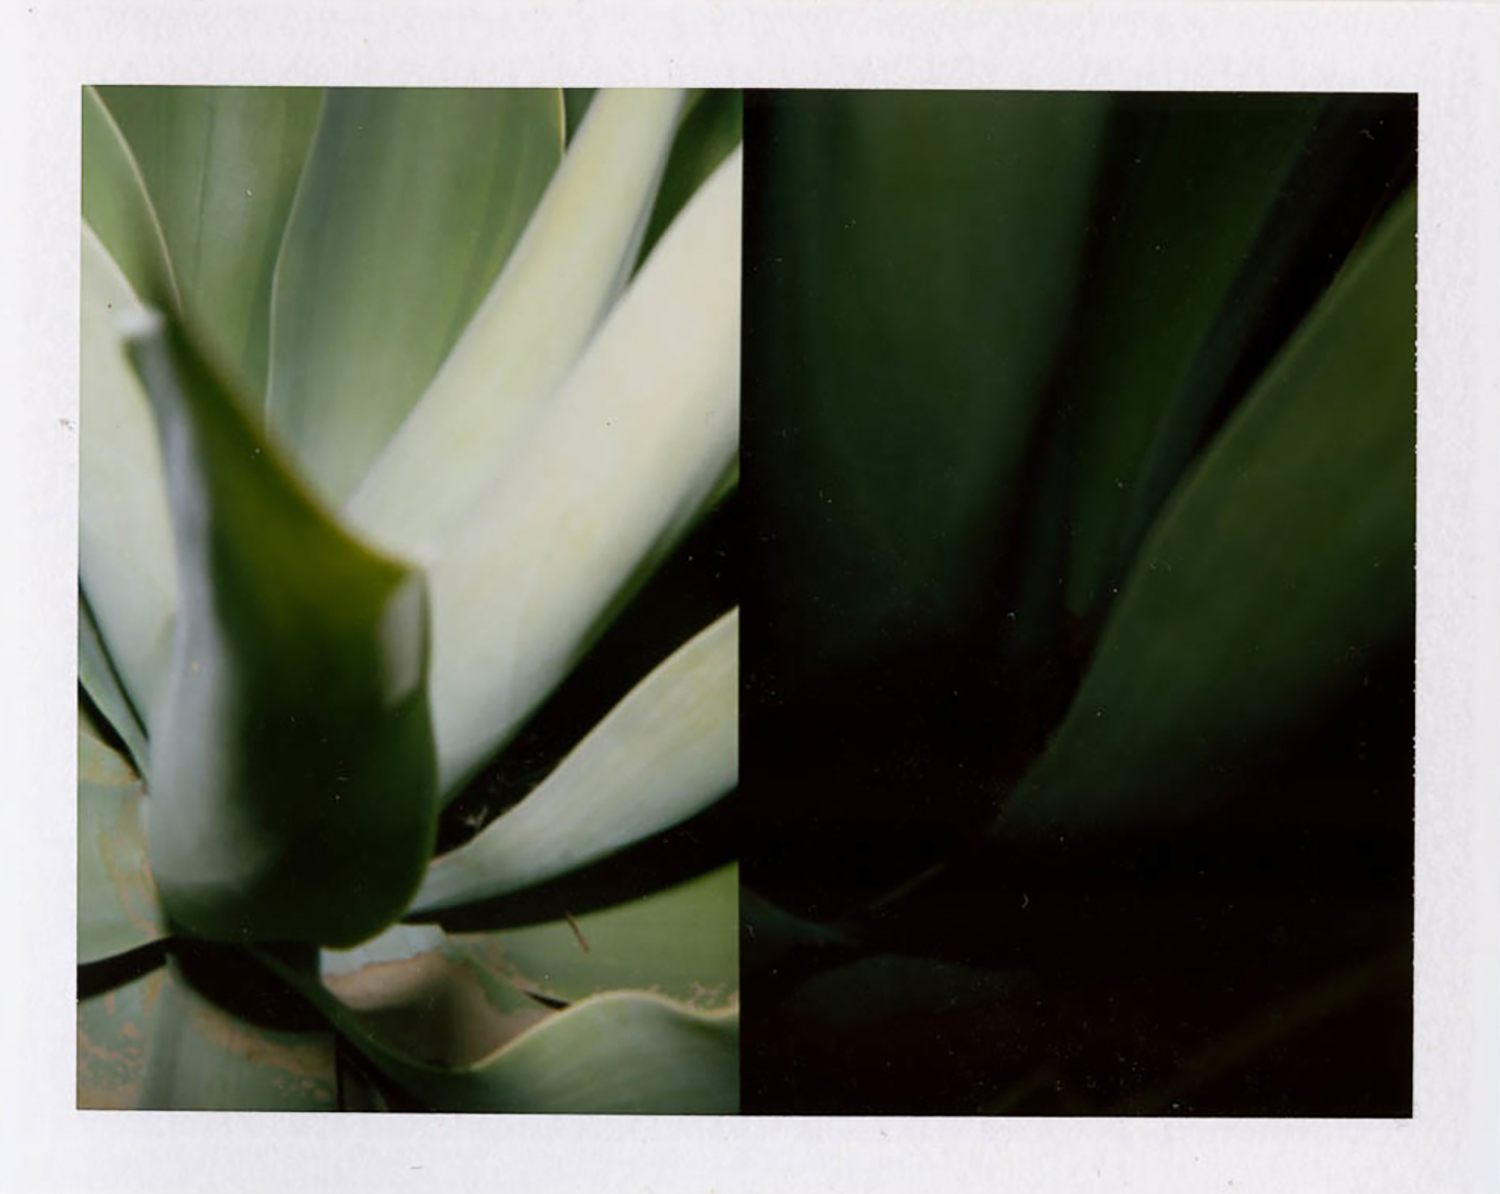  I.D.040, The Polaroid Revolutionary Workers, 2013, Polaroid Picture, 107mm x 86mm 